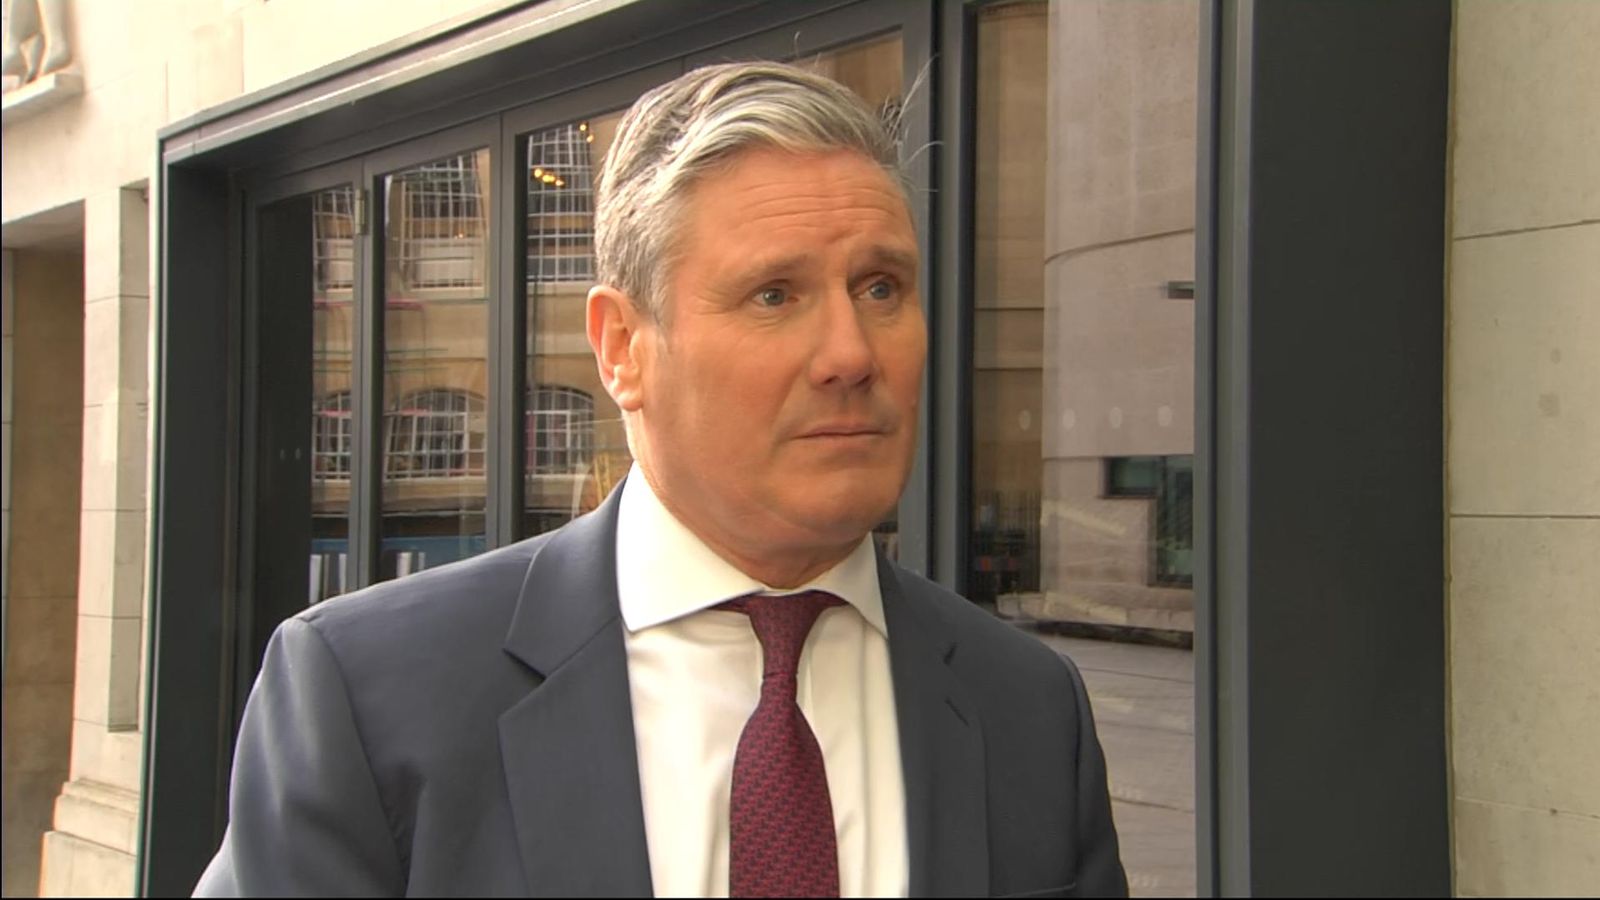 'If you don't reform the NHS I fear it will die': Sir Keir Starmer pledges overhaul of GP services